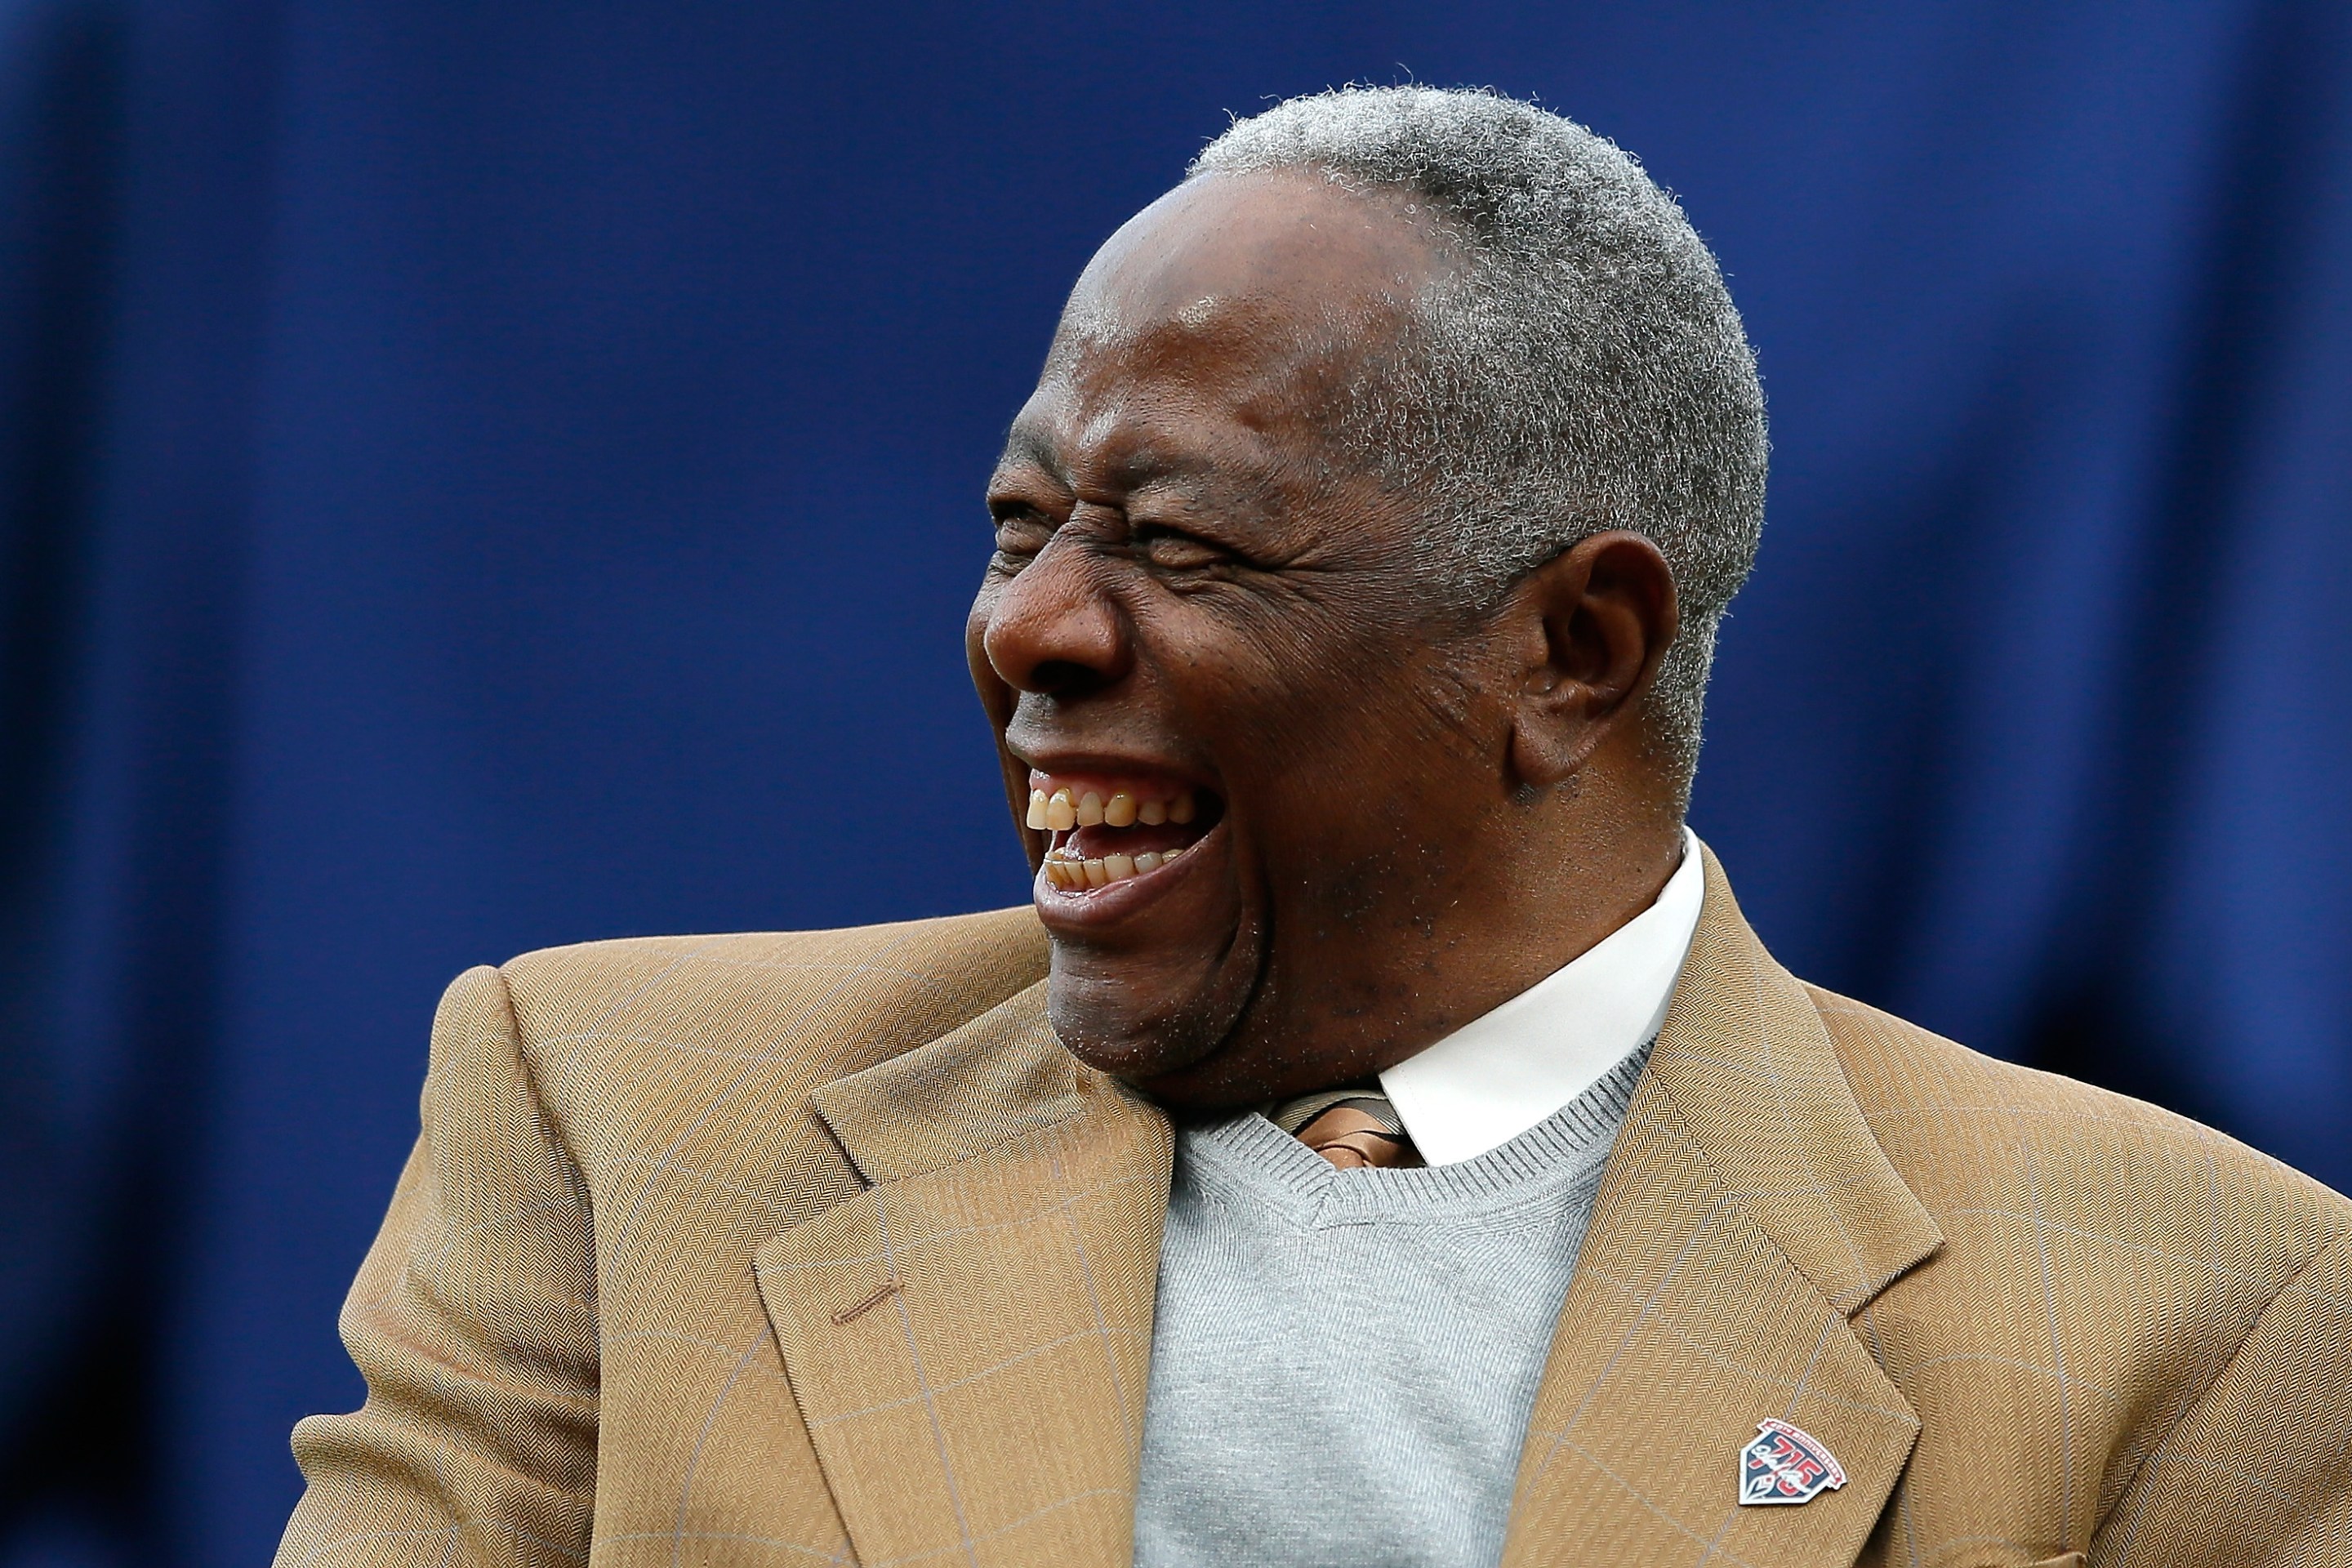 Hank Aaron, seen here laughing at a Mets/Braves game.